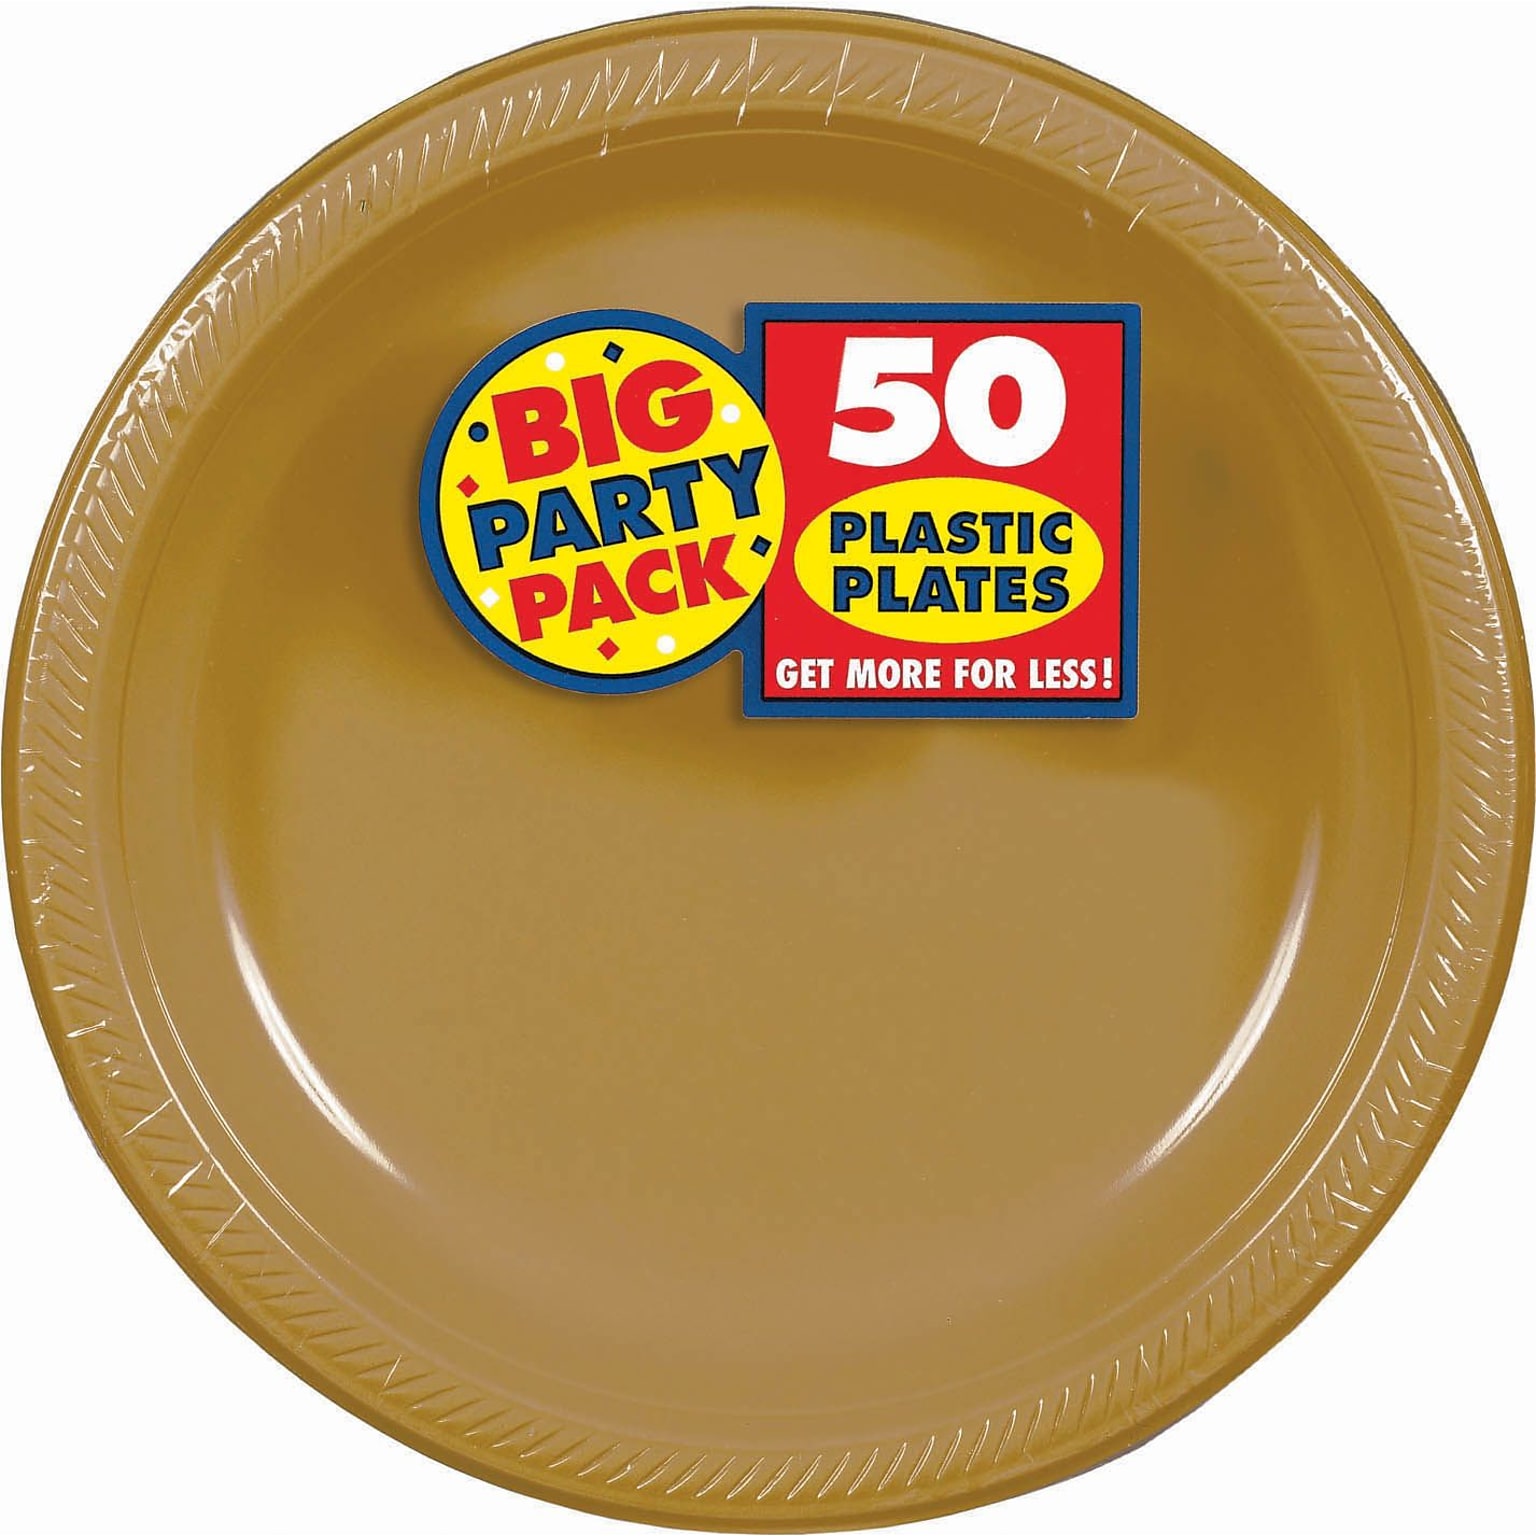 Amscan Big Party Pack 10.25 Gold Round Plastic Plate, 2/Pack, 50 Per Pack (630732.19)